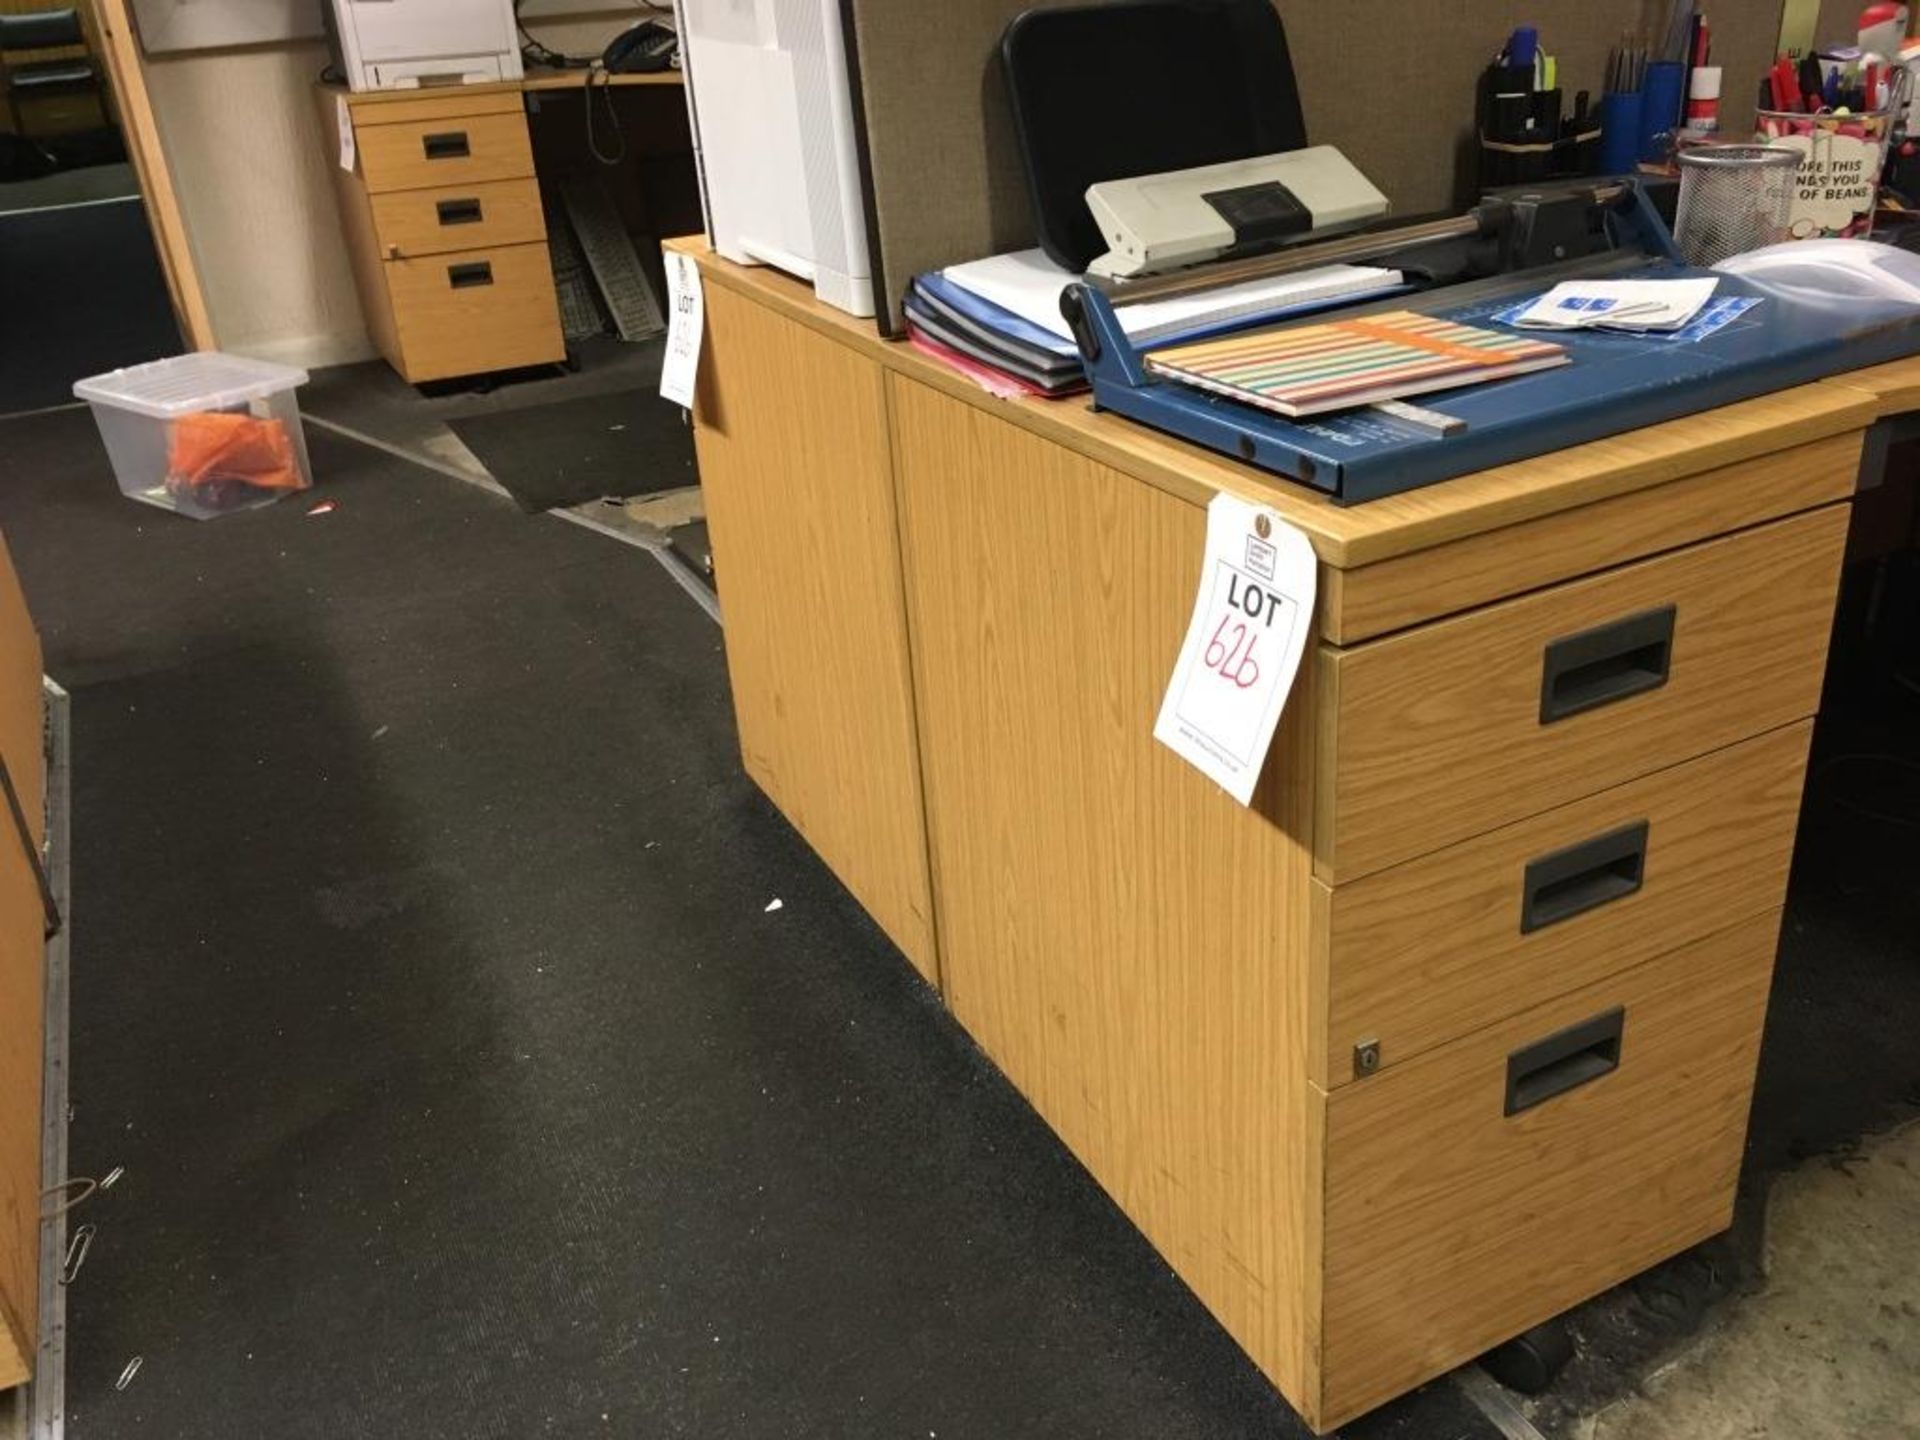 Three 3-drawer wood veneer pedestals (Please note: All items on the first floor will require